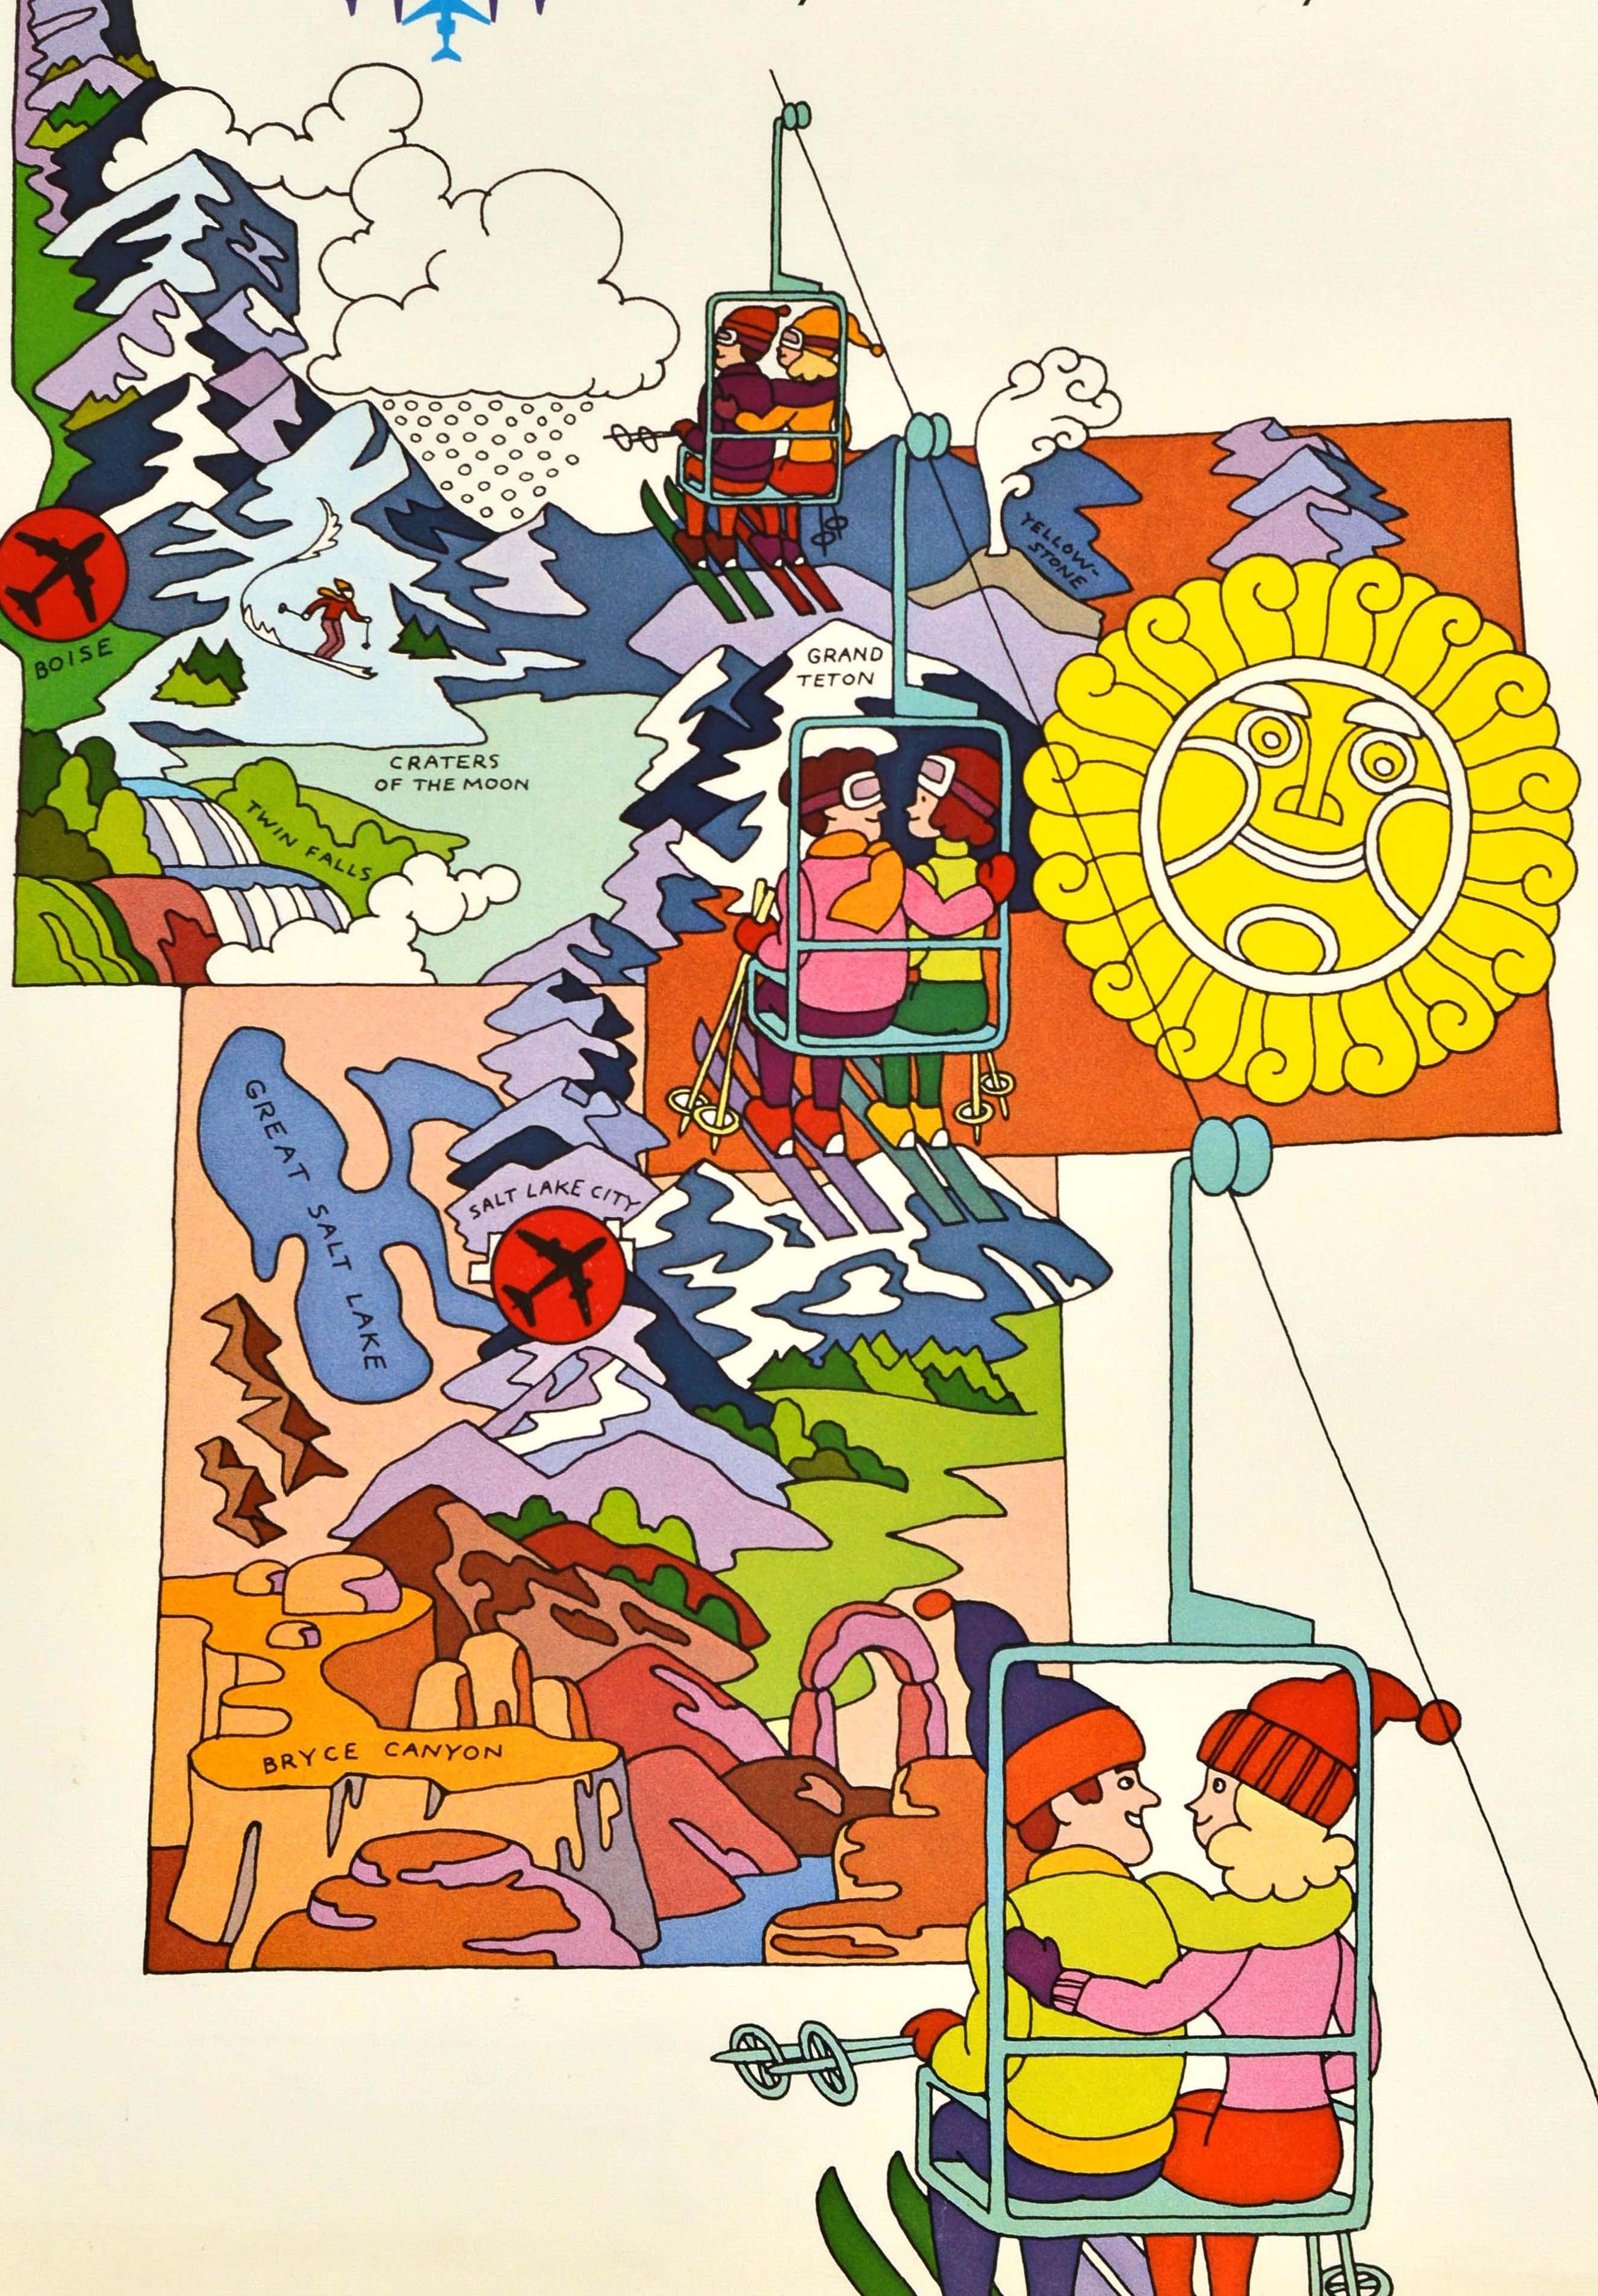 Original vintage winter sport travel poster - Ski The West by United Air Lines Utah Wyoming Idaho Your land is our land - featuring a fun illustration depicting couples on a ski lift going up a mountain with colourful psychedelic style images of